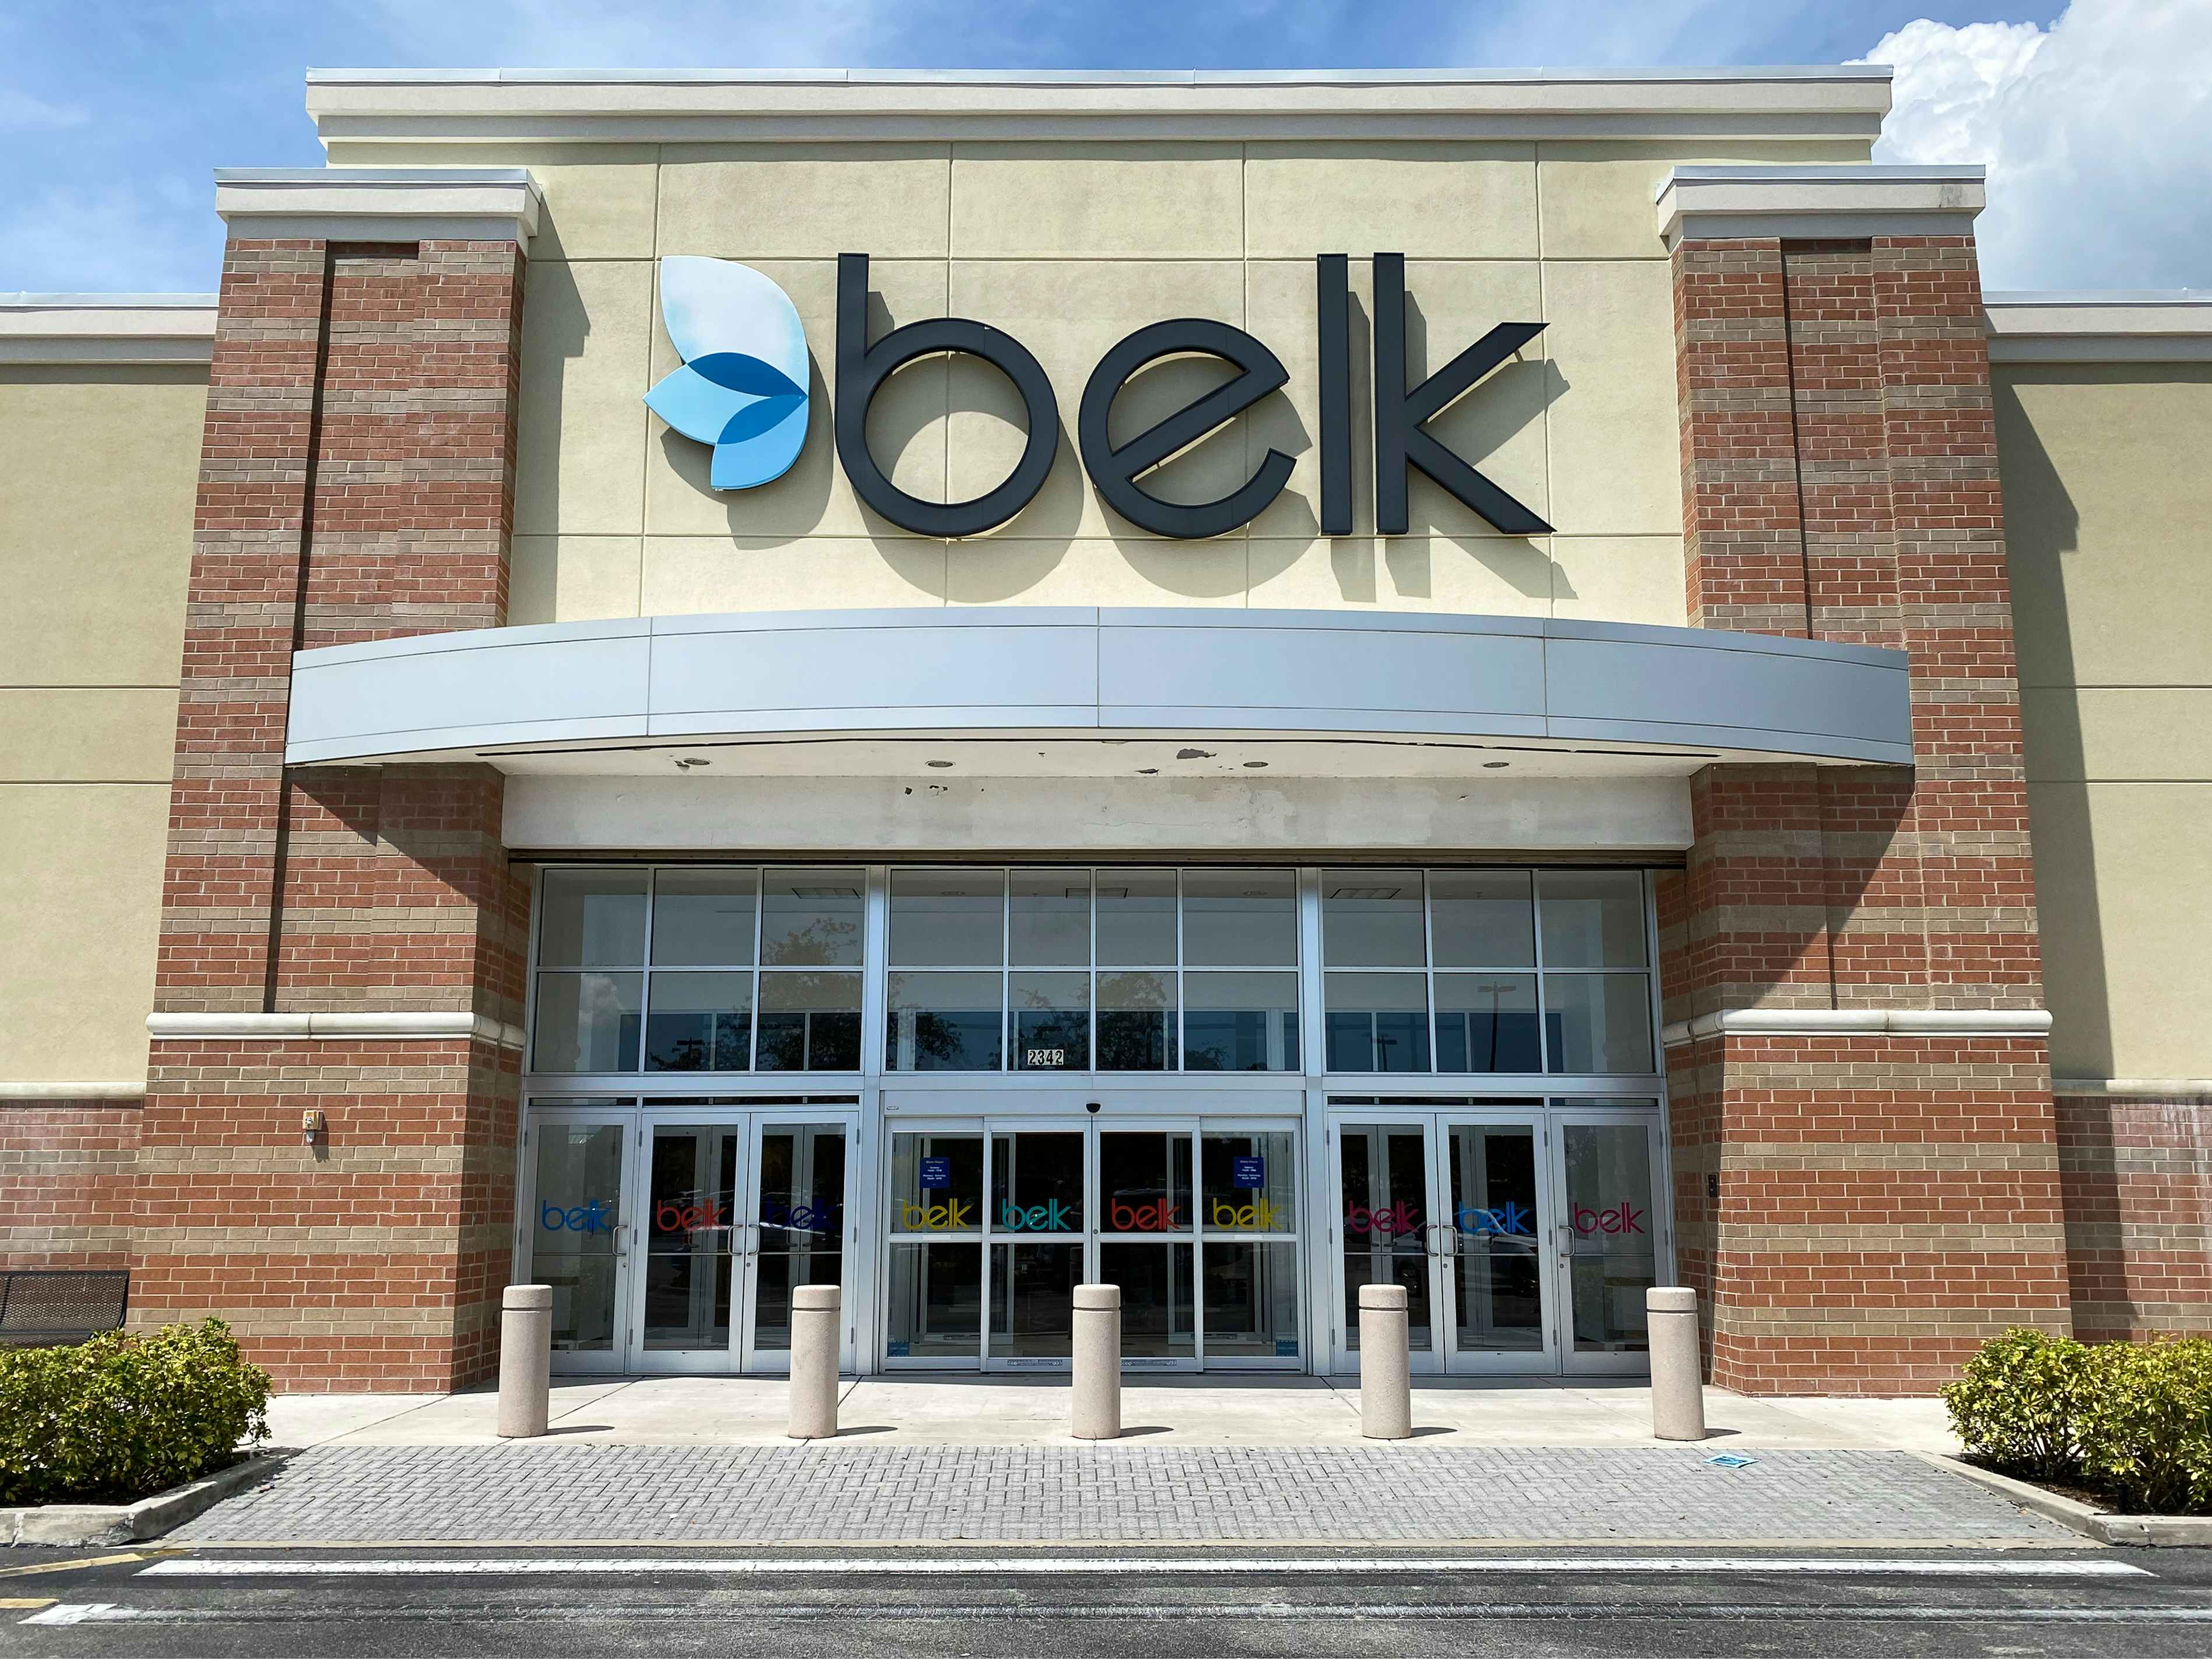 A Belk store front